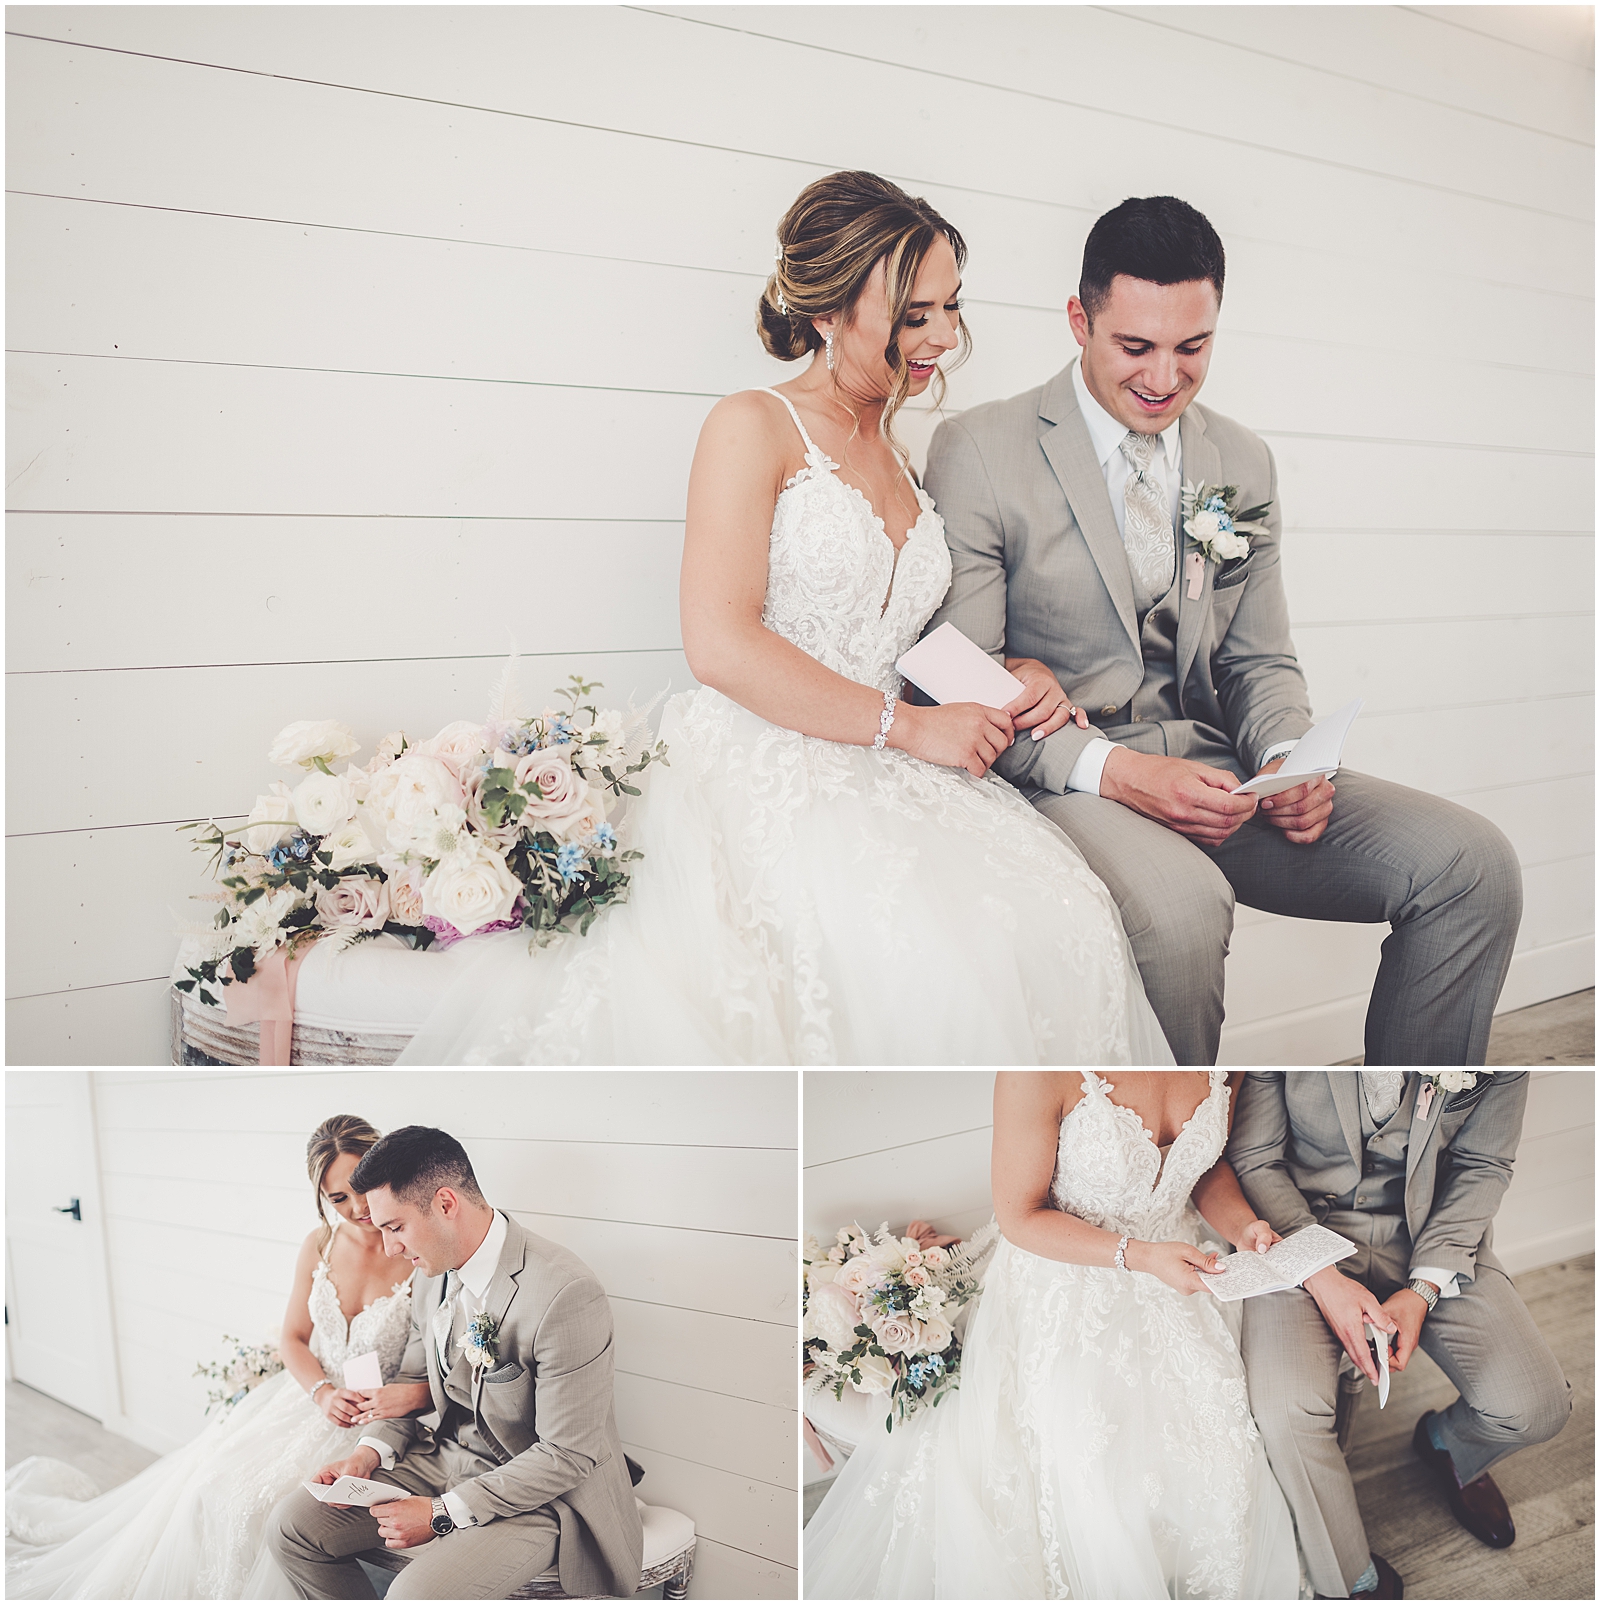 Emily and Milan's romantic summer wedding at Providence Vineyard in Hebron, IL with Chicagoland wedding Photographer Kara Evans Photographer.